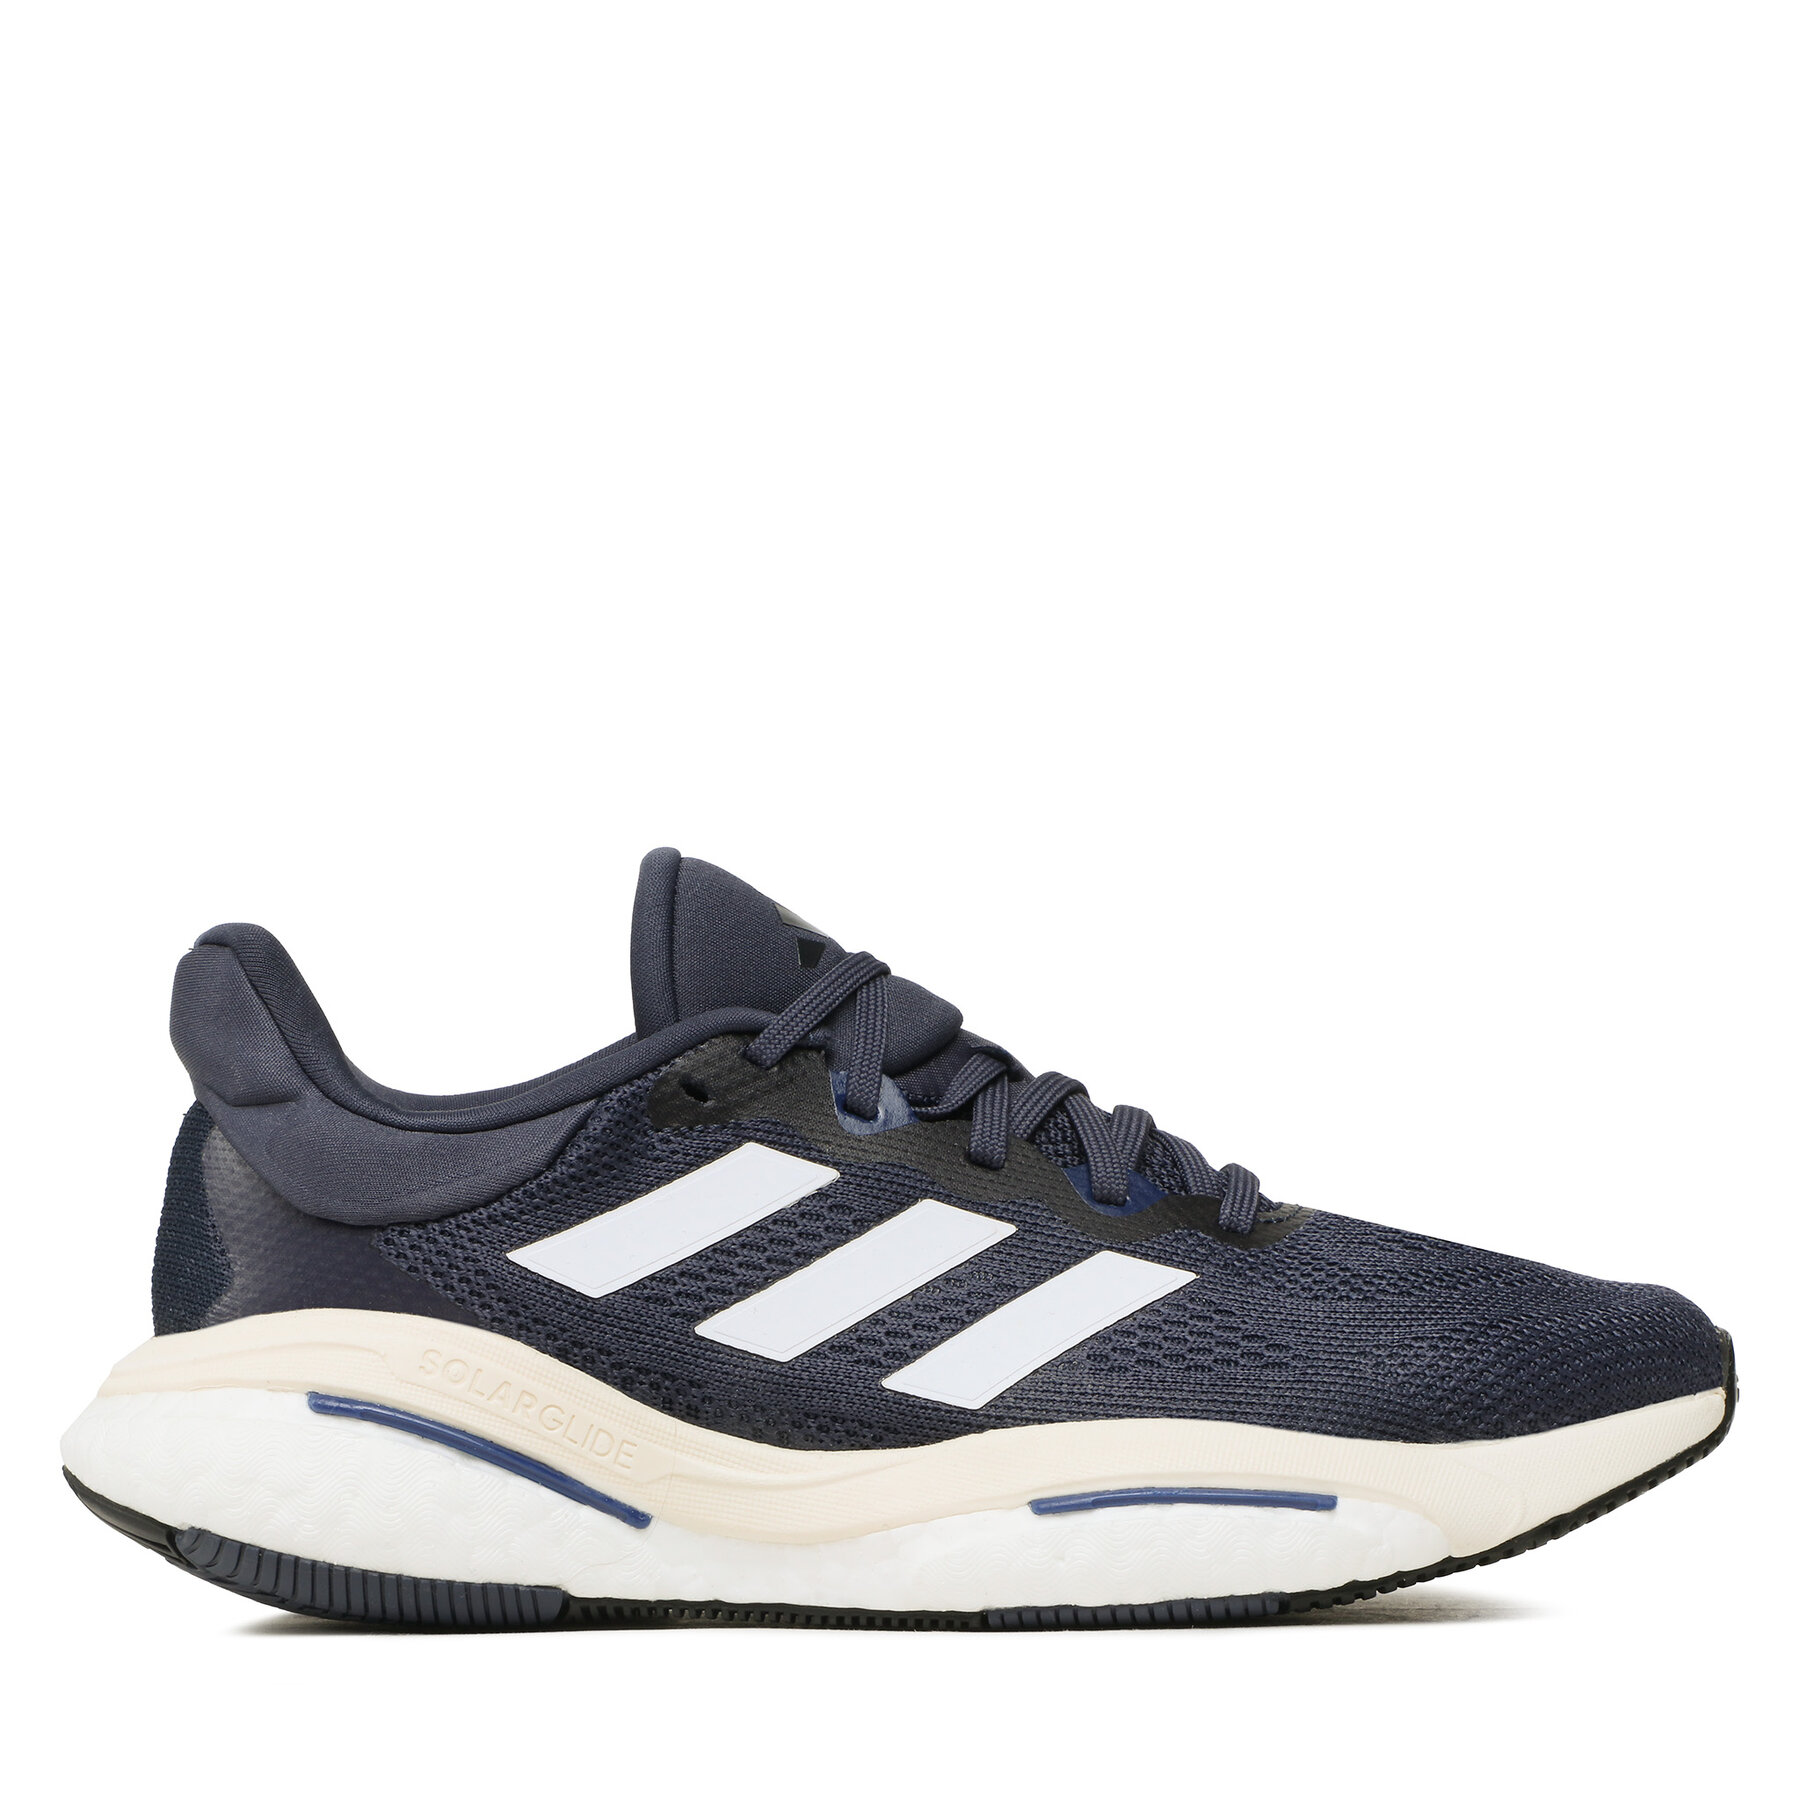 Adidas Solarglide 6 shadow navy/cloud white/victory blue